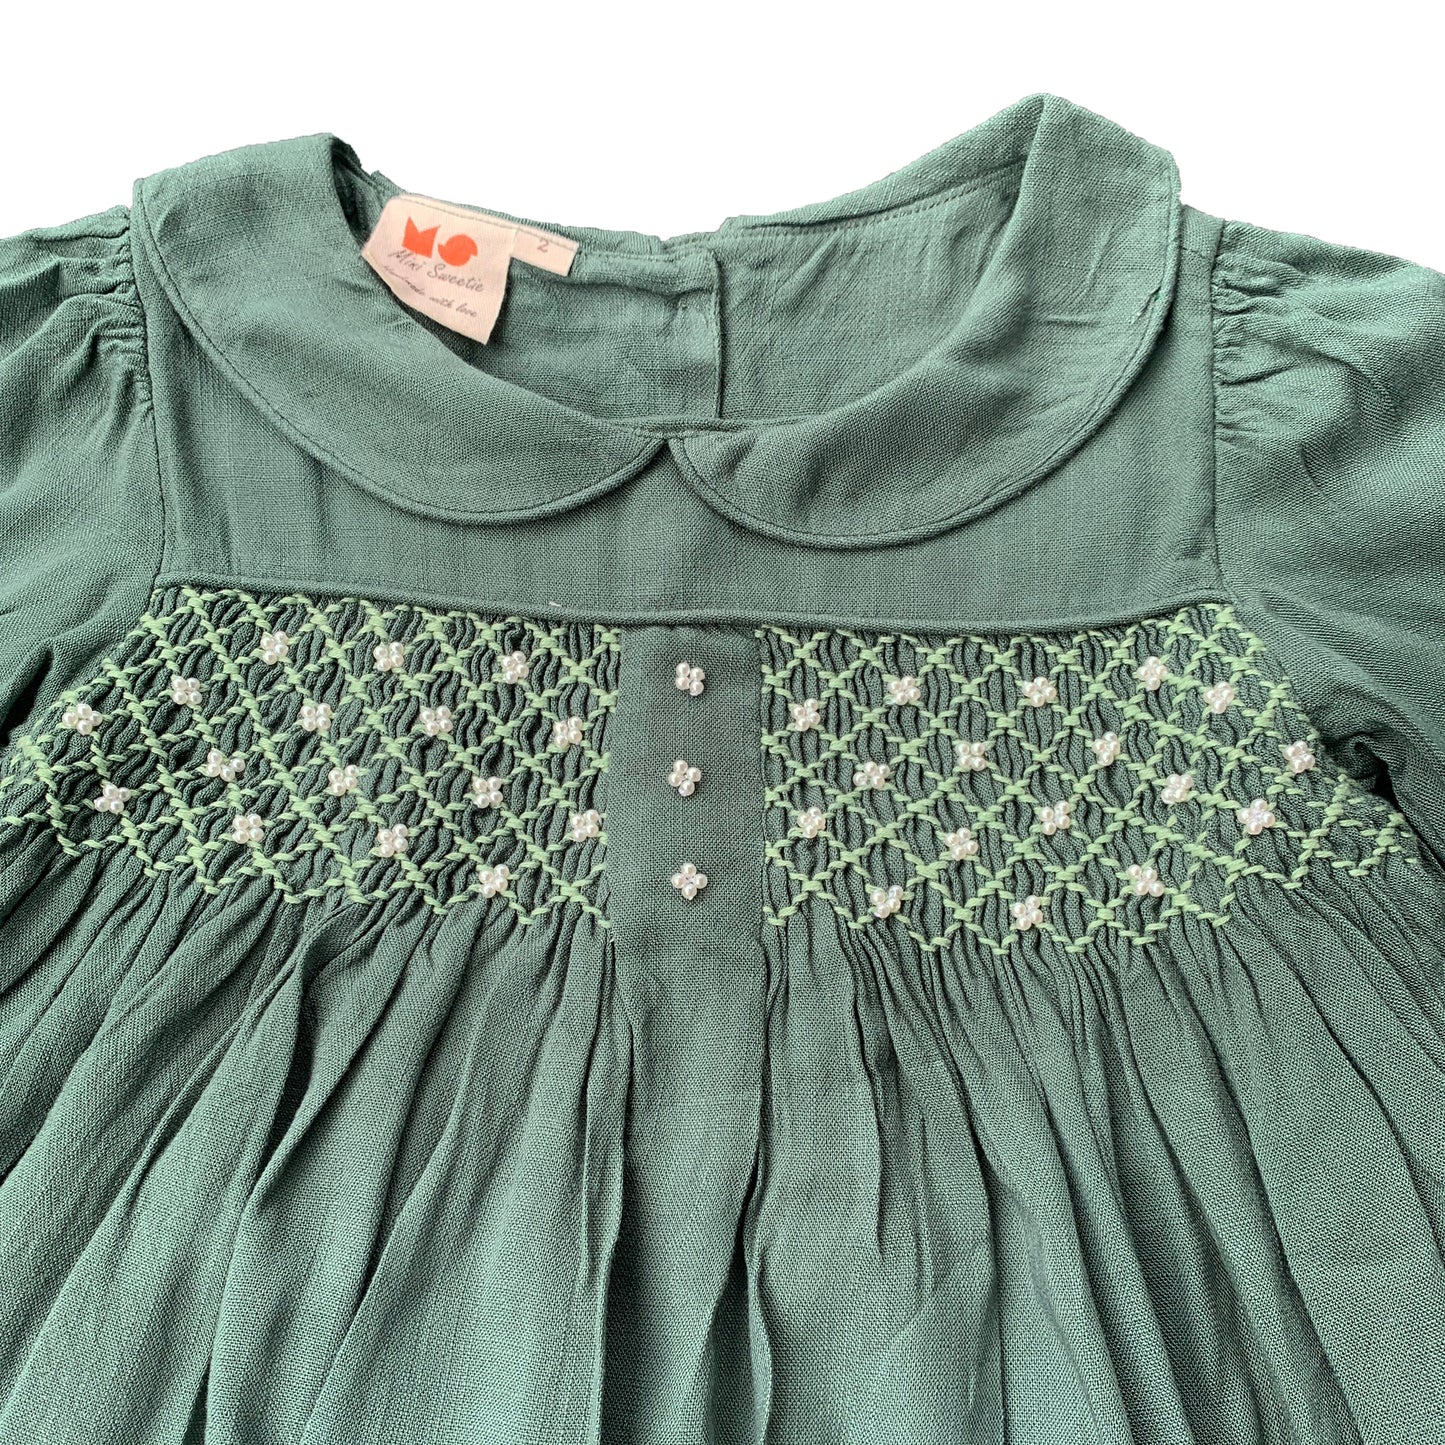 Green long sleeves hand smocked with embroidered pearls